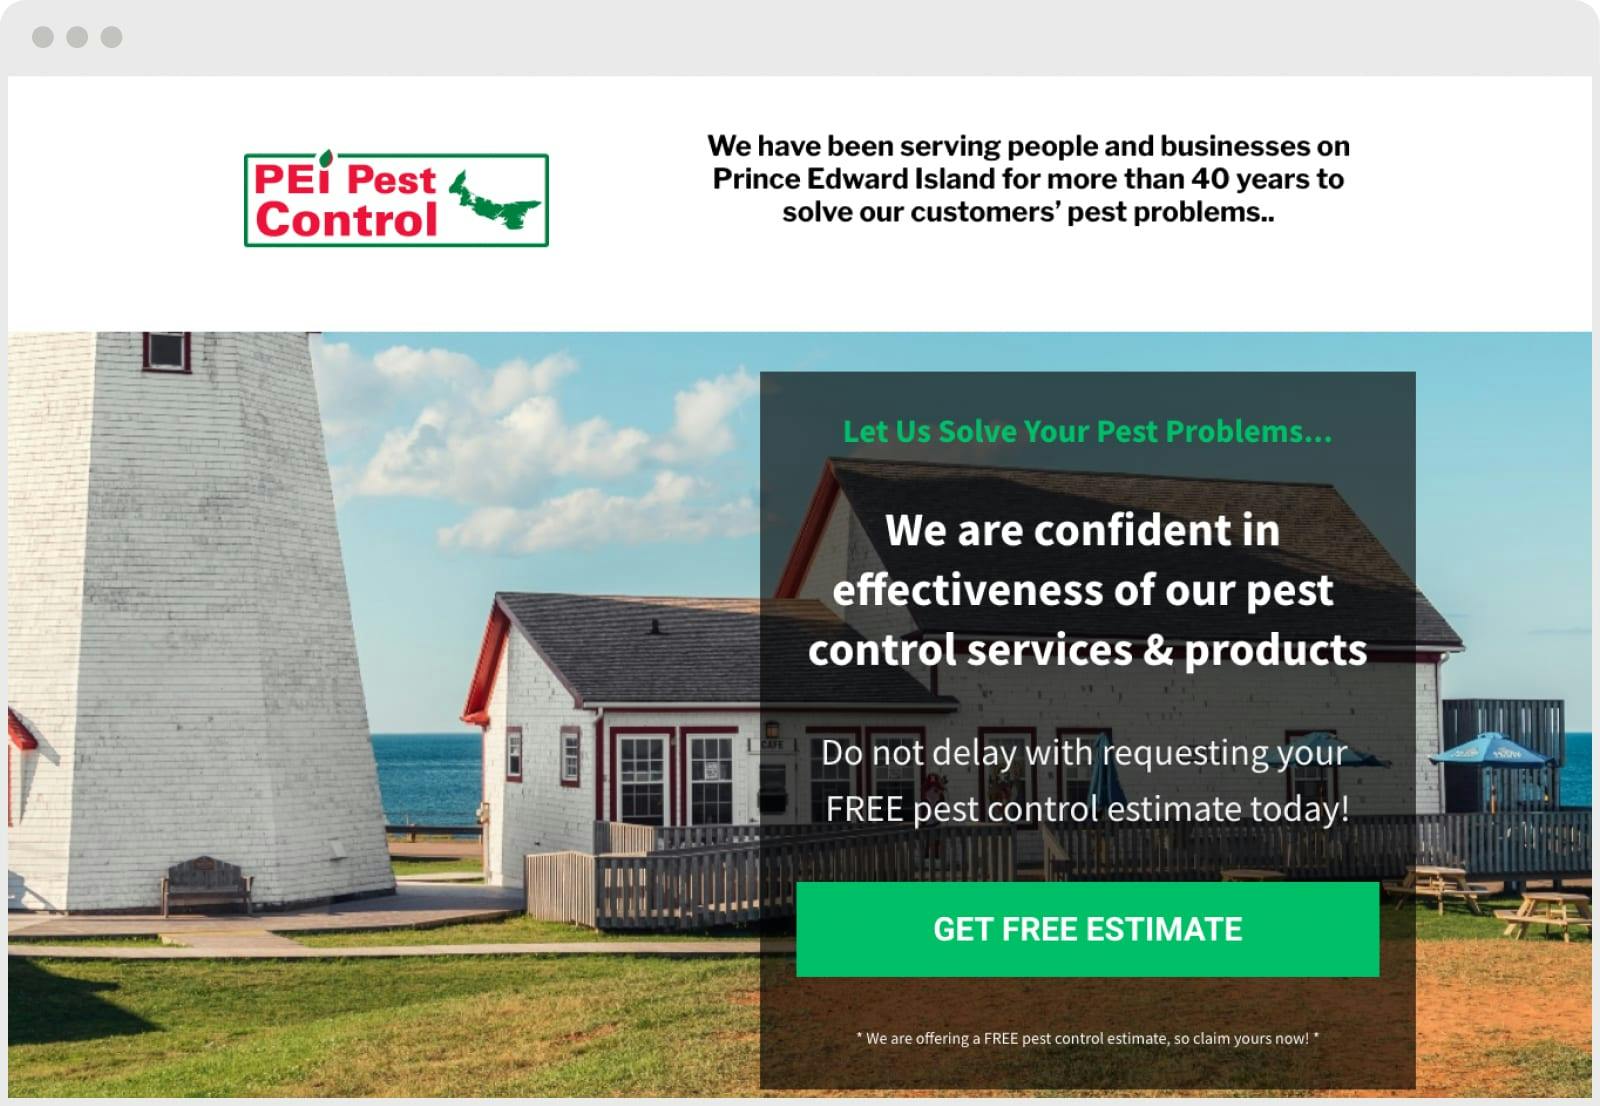 bottom-of-funnel lead magnet landing page example for a free estimate